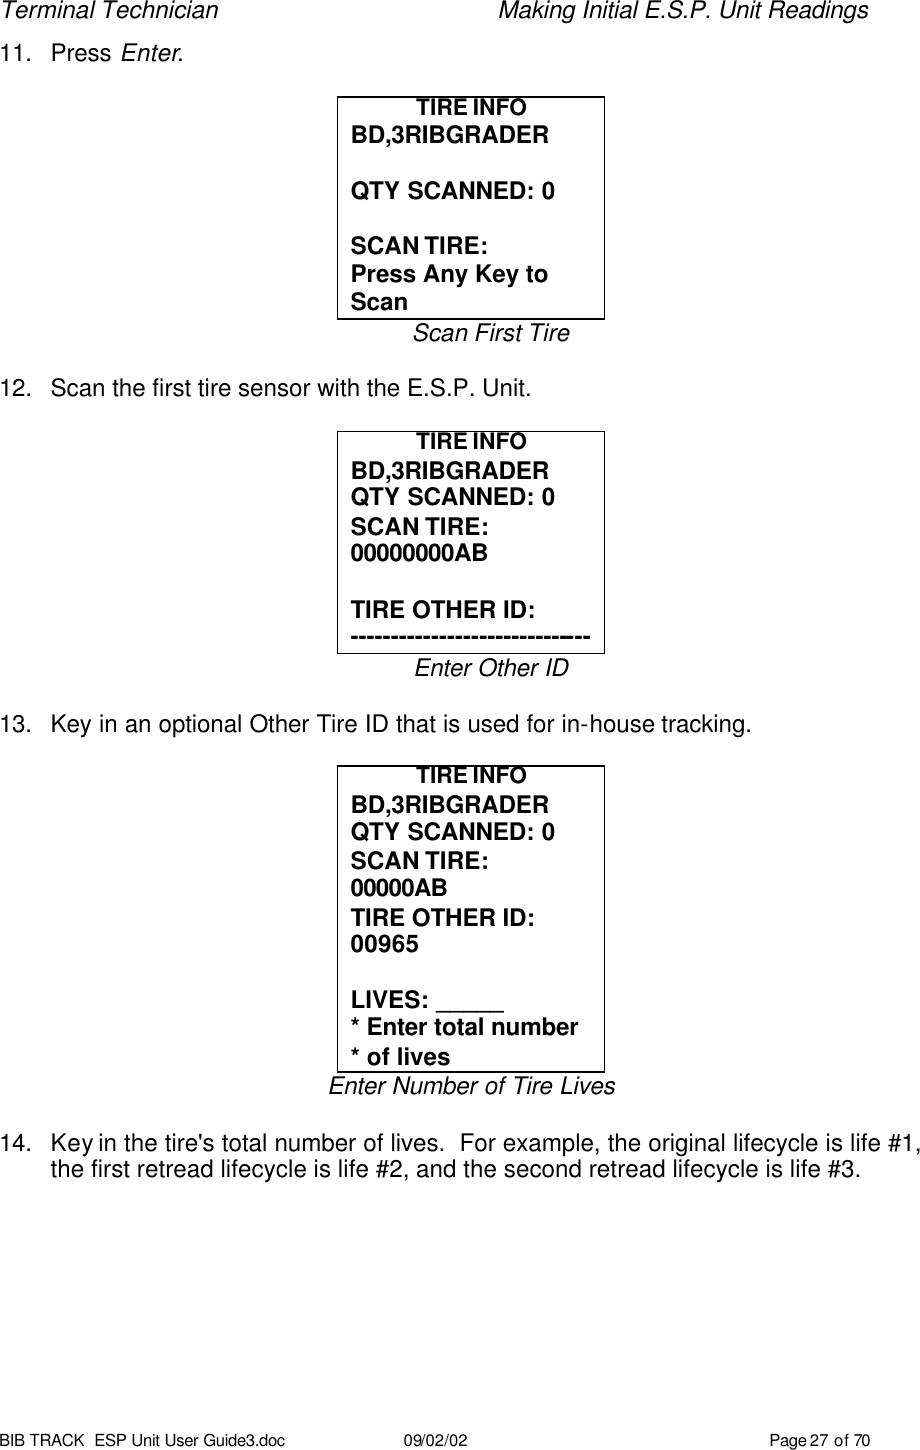 Terminal Technician    Making Initial E.S.P. Unit Readings BIB TRACK  ESP Unit User Guide3.doc 09/02/02 Page 27 of 70 11. Press Enter.  TIRE INFO BD,3RIBGRADER  QTY SCANNED: 0  SCAN TIRE: Press Any Key to Scan Scan First Tire  12. Scan the first tire sensor with the E.S.P. Unit.  TIRE INFO BD,3RIBGRADER QTY SCANNED: 0 SCAN TIRE: 00000000AB  TIRE OTHER ID: ------------------------------ Enter Other ID  13. Key in an optional Other Tire ID that is used for in-house tracking.  TIRE INFO BD,3RIBGRADER QTY SCANNED: 0 SCAN TIRE: 00000AB  TIRE OTHER ID: 00965  LIVES: _____ * Enter total number * of lives Enter Number of Tire Lives  14. Key in the tire&apos;s total number of lives.  For example, the original lifecycle is life #1, the first retread lifecycle is life #2, and the second retread lifecycle is life #3.  